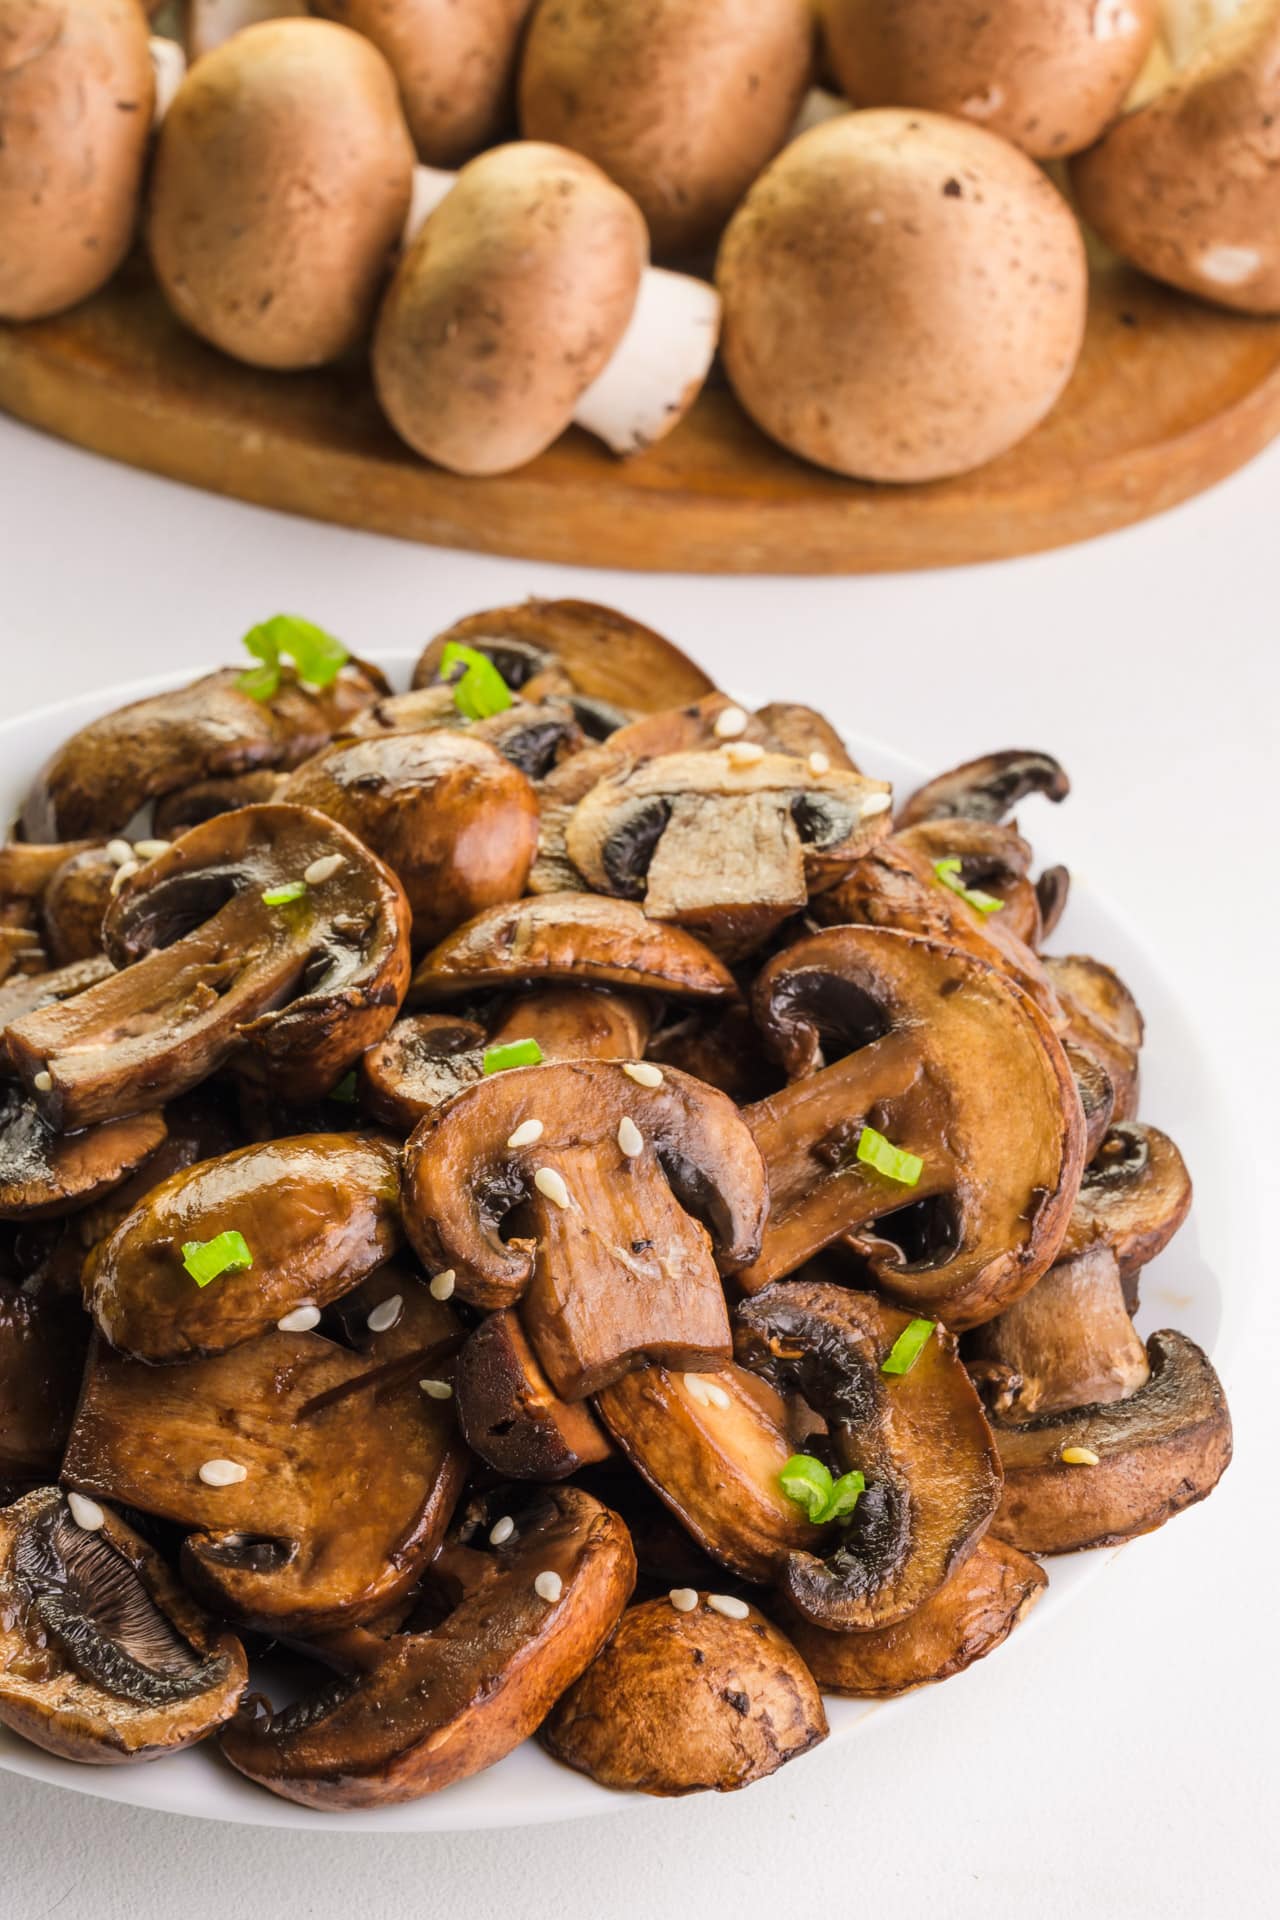  A plates of healthy sautéed mushrooms sits in front of a cutting board with raw mushrooms.